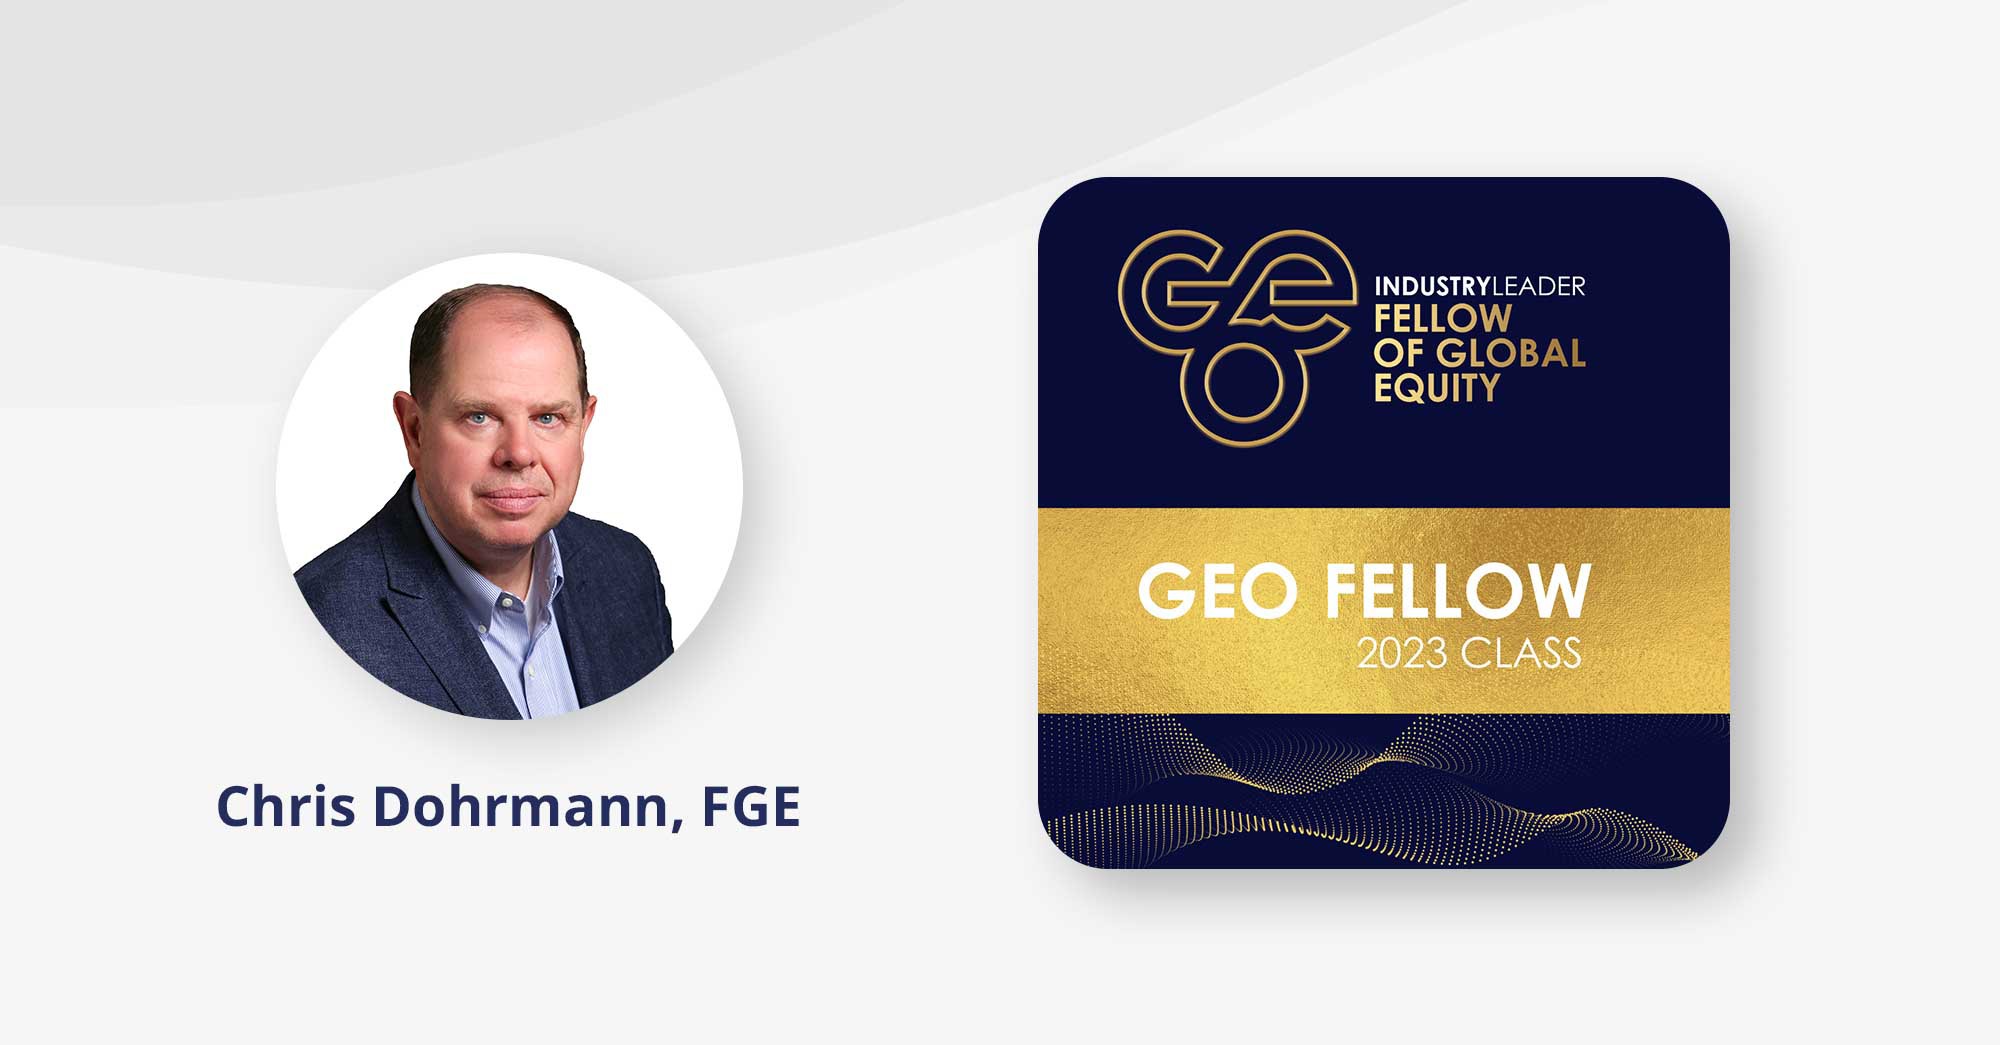 Congratulations Chris Dohrmann on being appointed a GEO Fellow